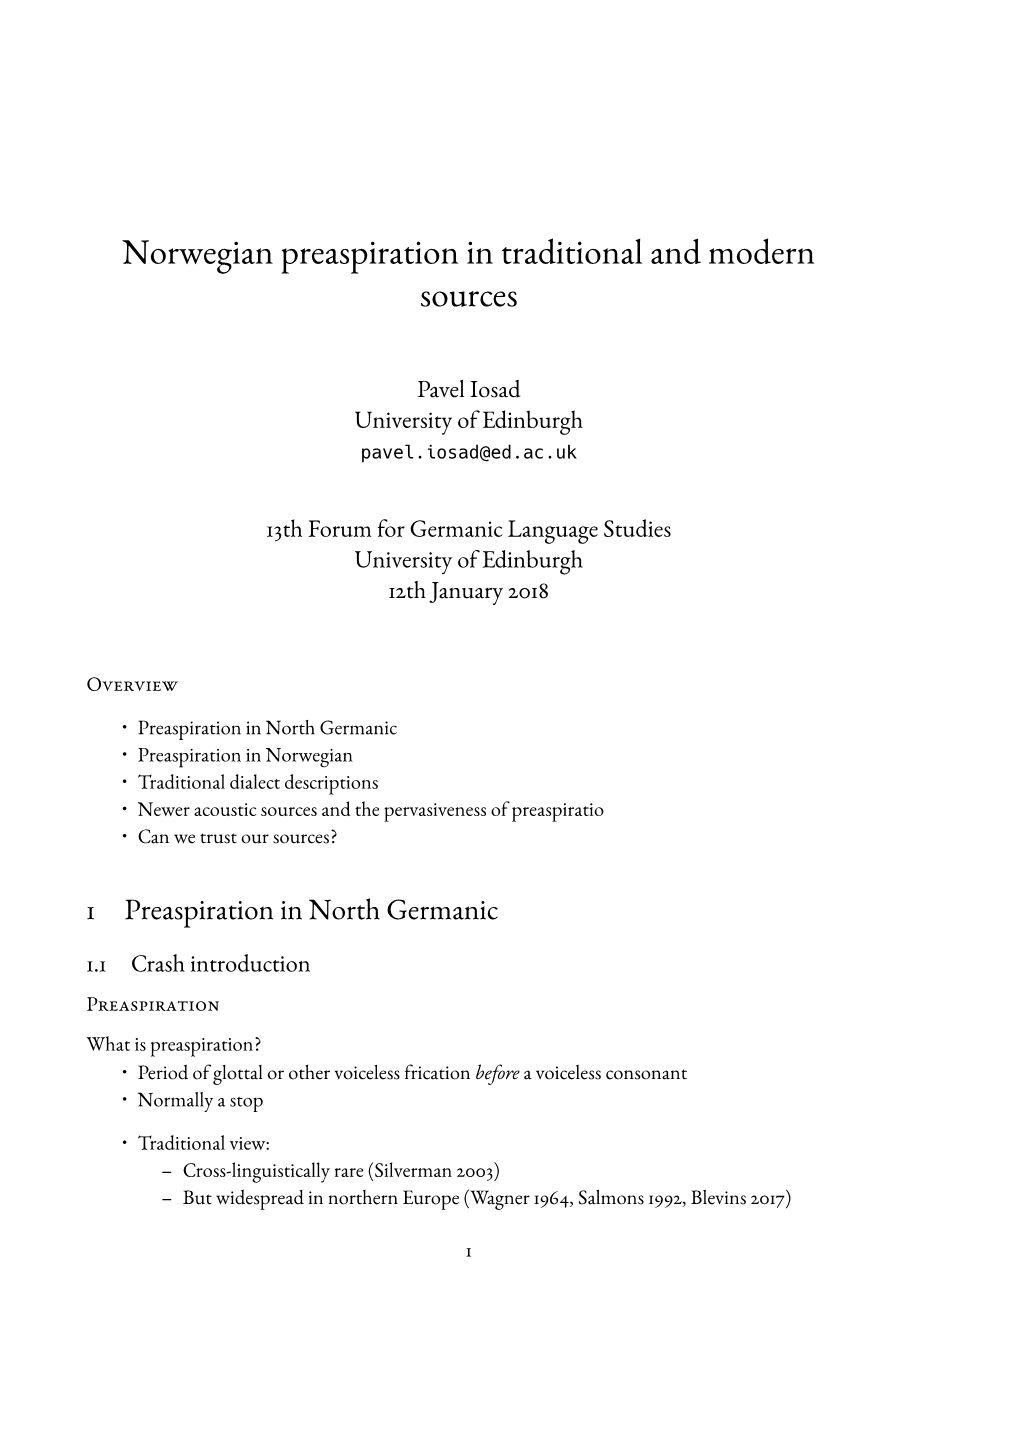 Norwegian Preaspiration in Traditional and Modern Sources